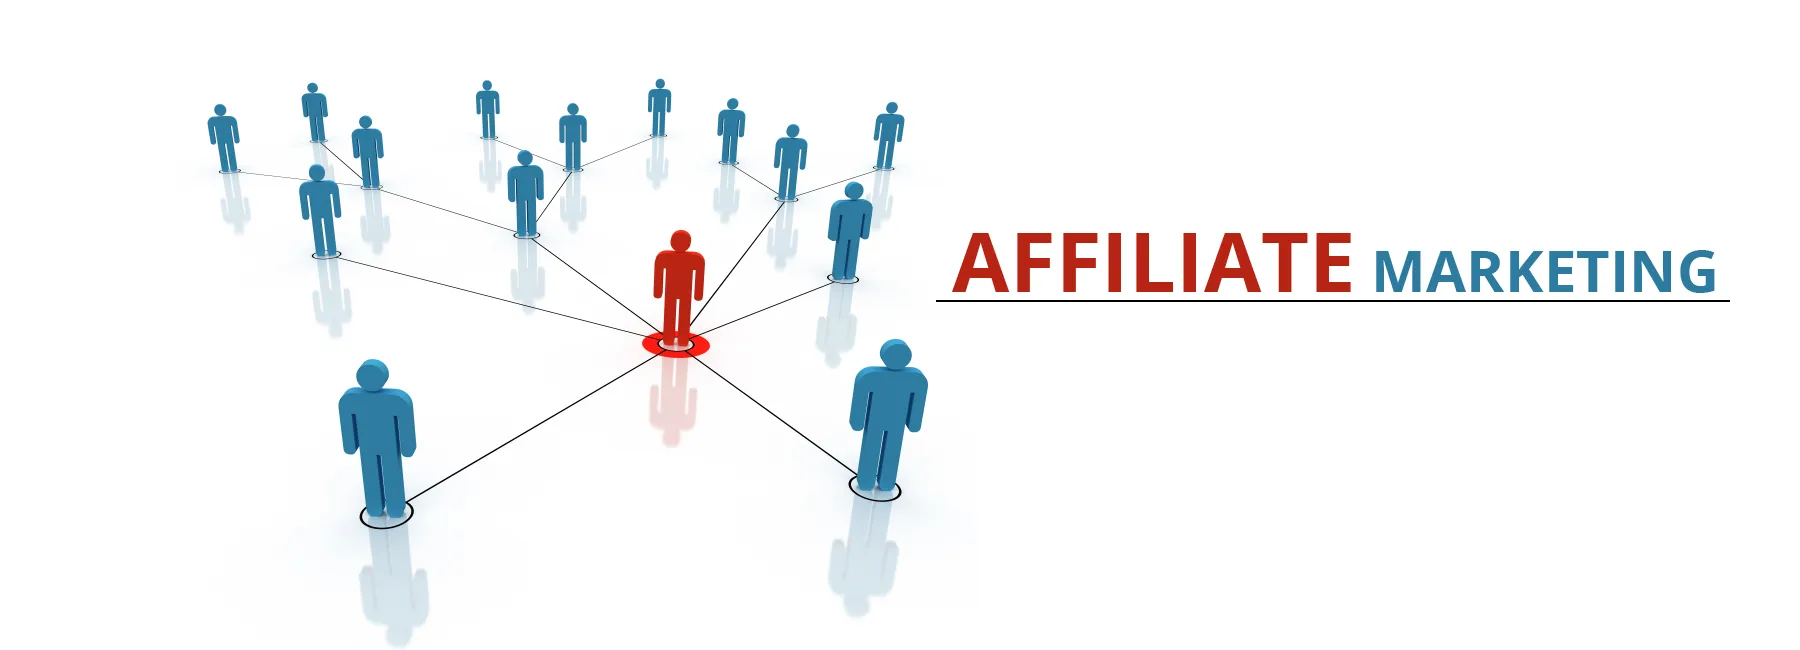 Is affiliate marketing the way to go?